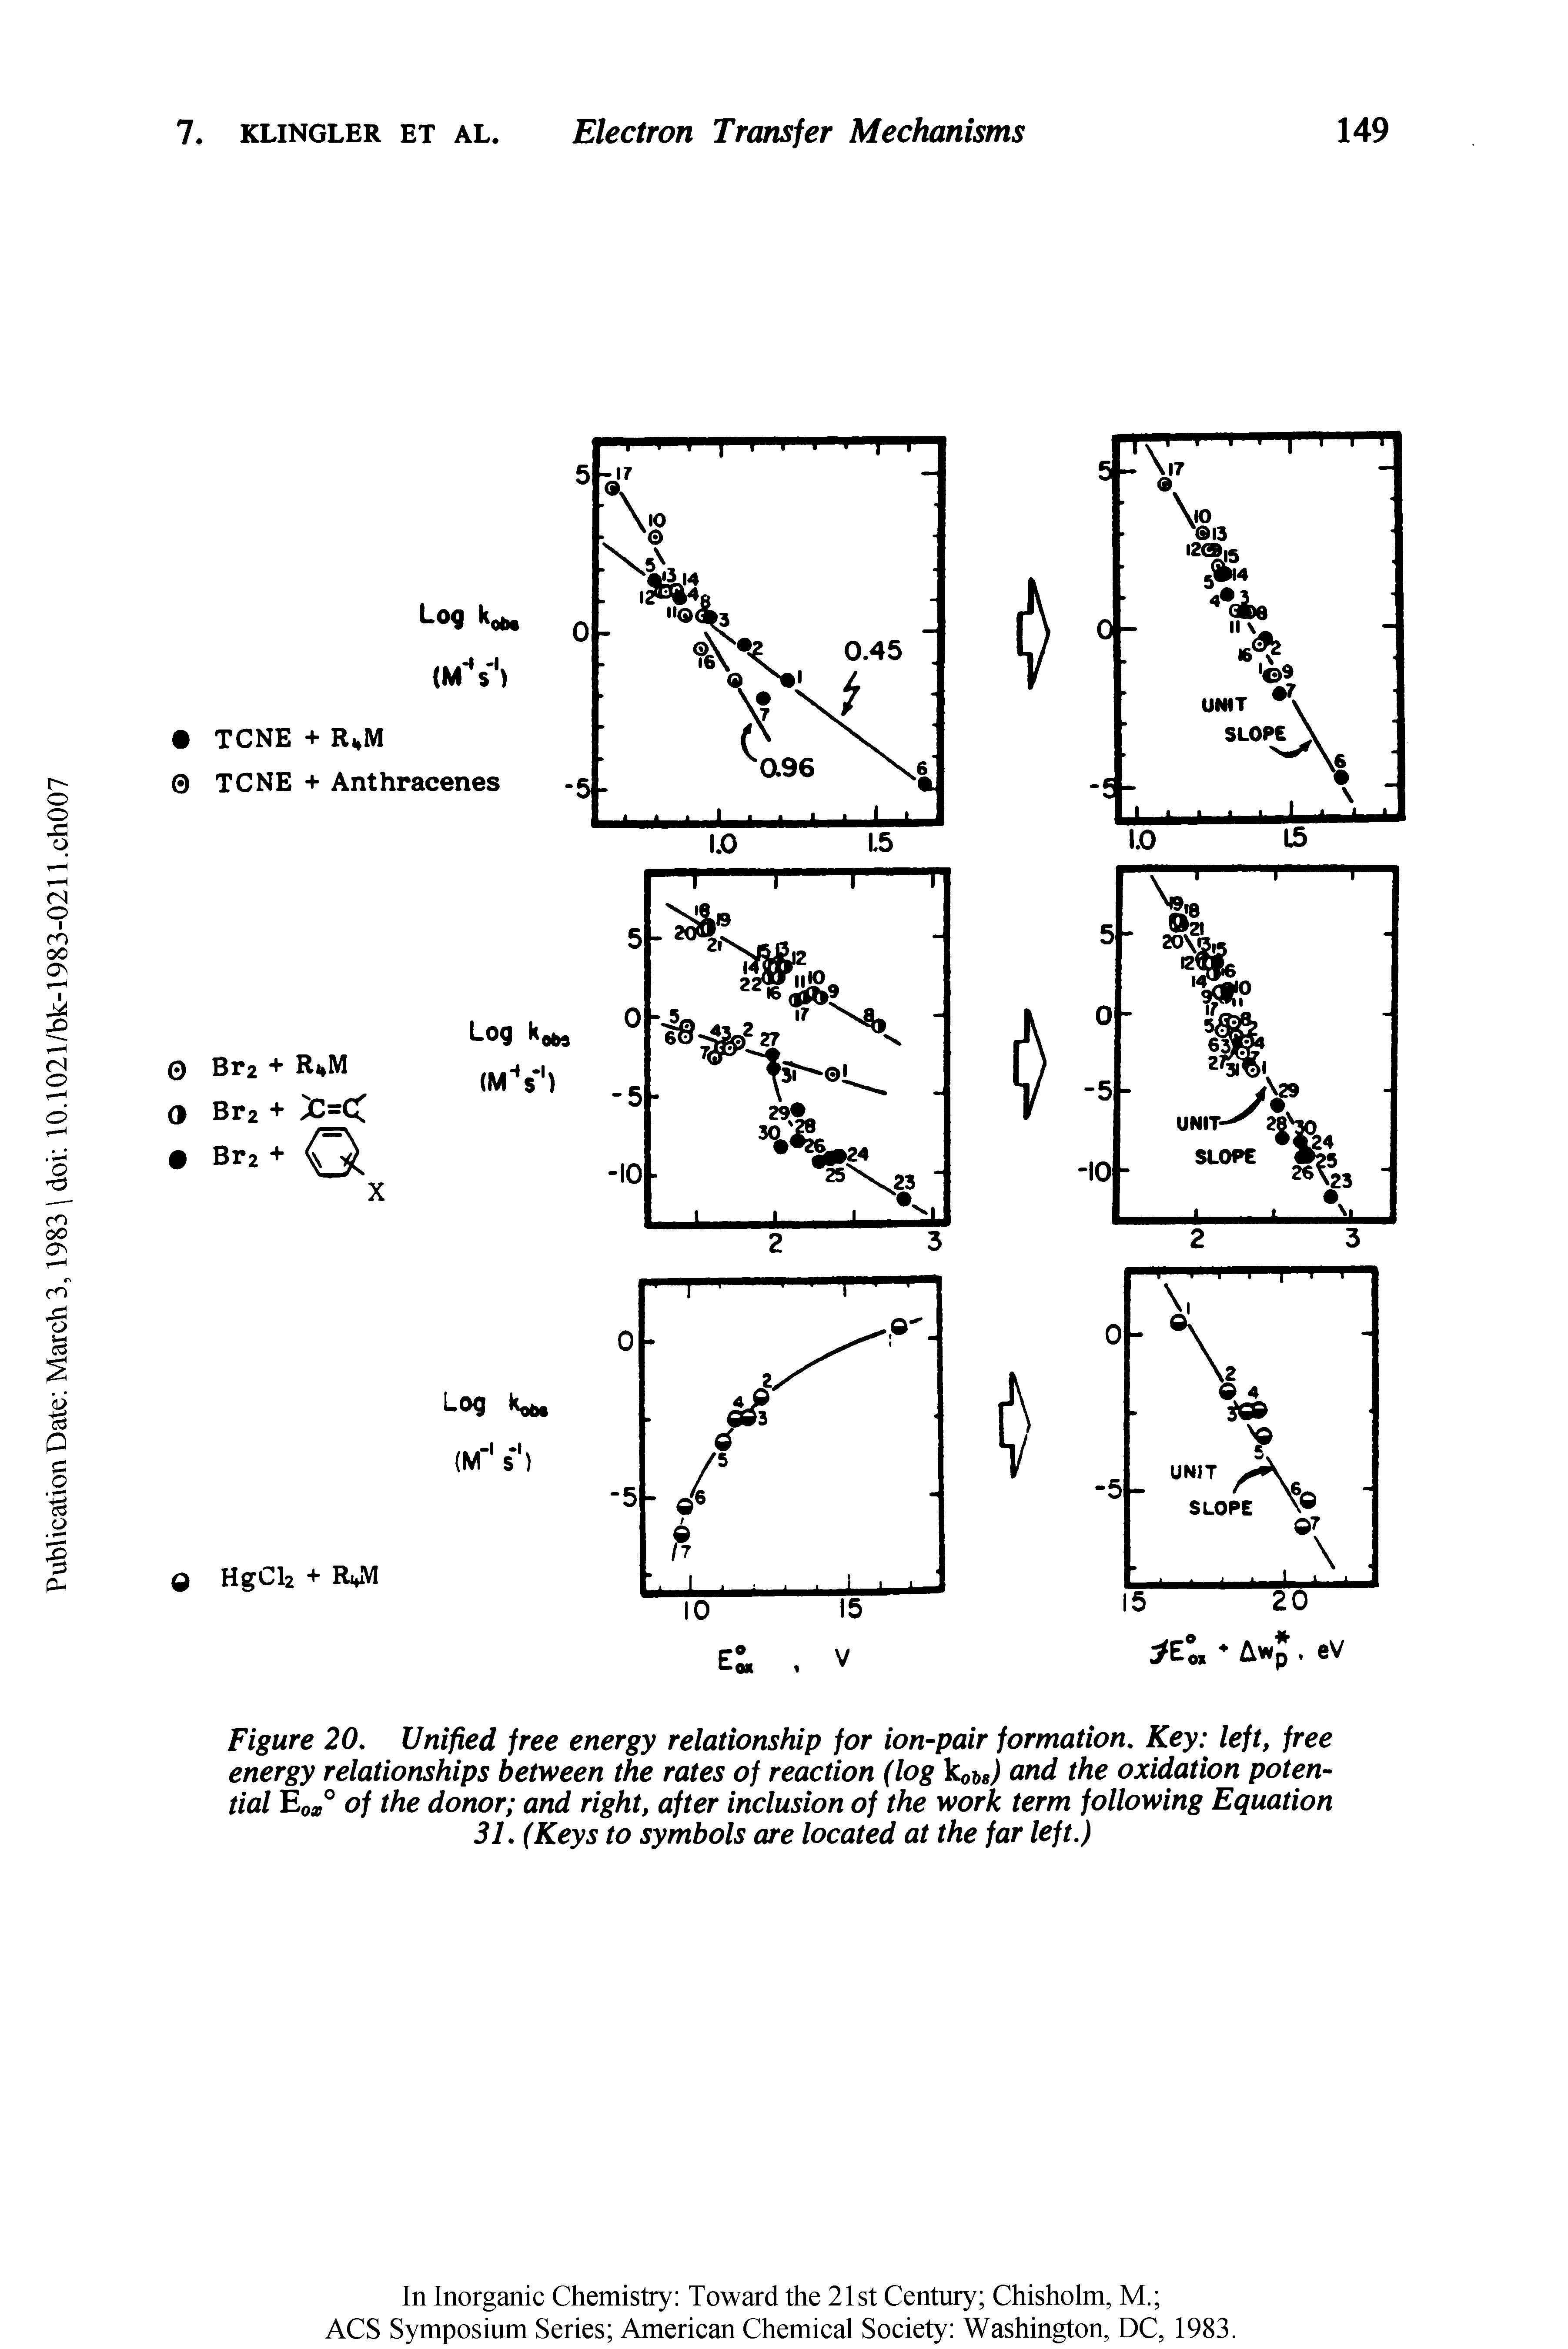 Figure 20, Unified free energy relationship for ion-pair formation. Key left, free energy relationships between the rates of reaction (log kobJ and the oxidation potential Eox° of the donor and right, after inclusion of the work term following Equation 31, (Keys to symbols are located at the far left.)...